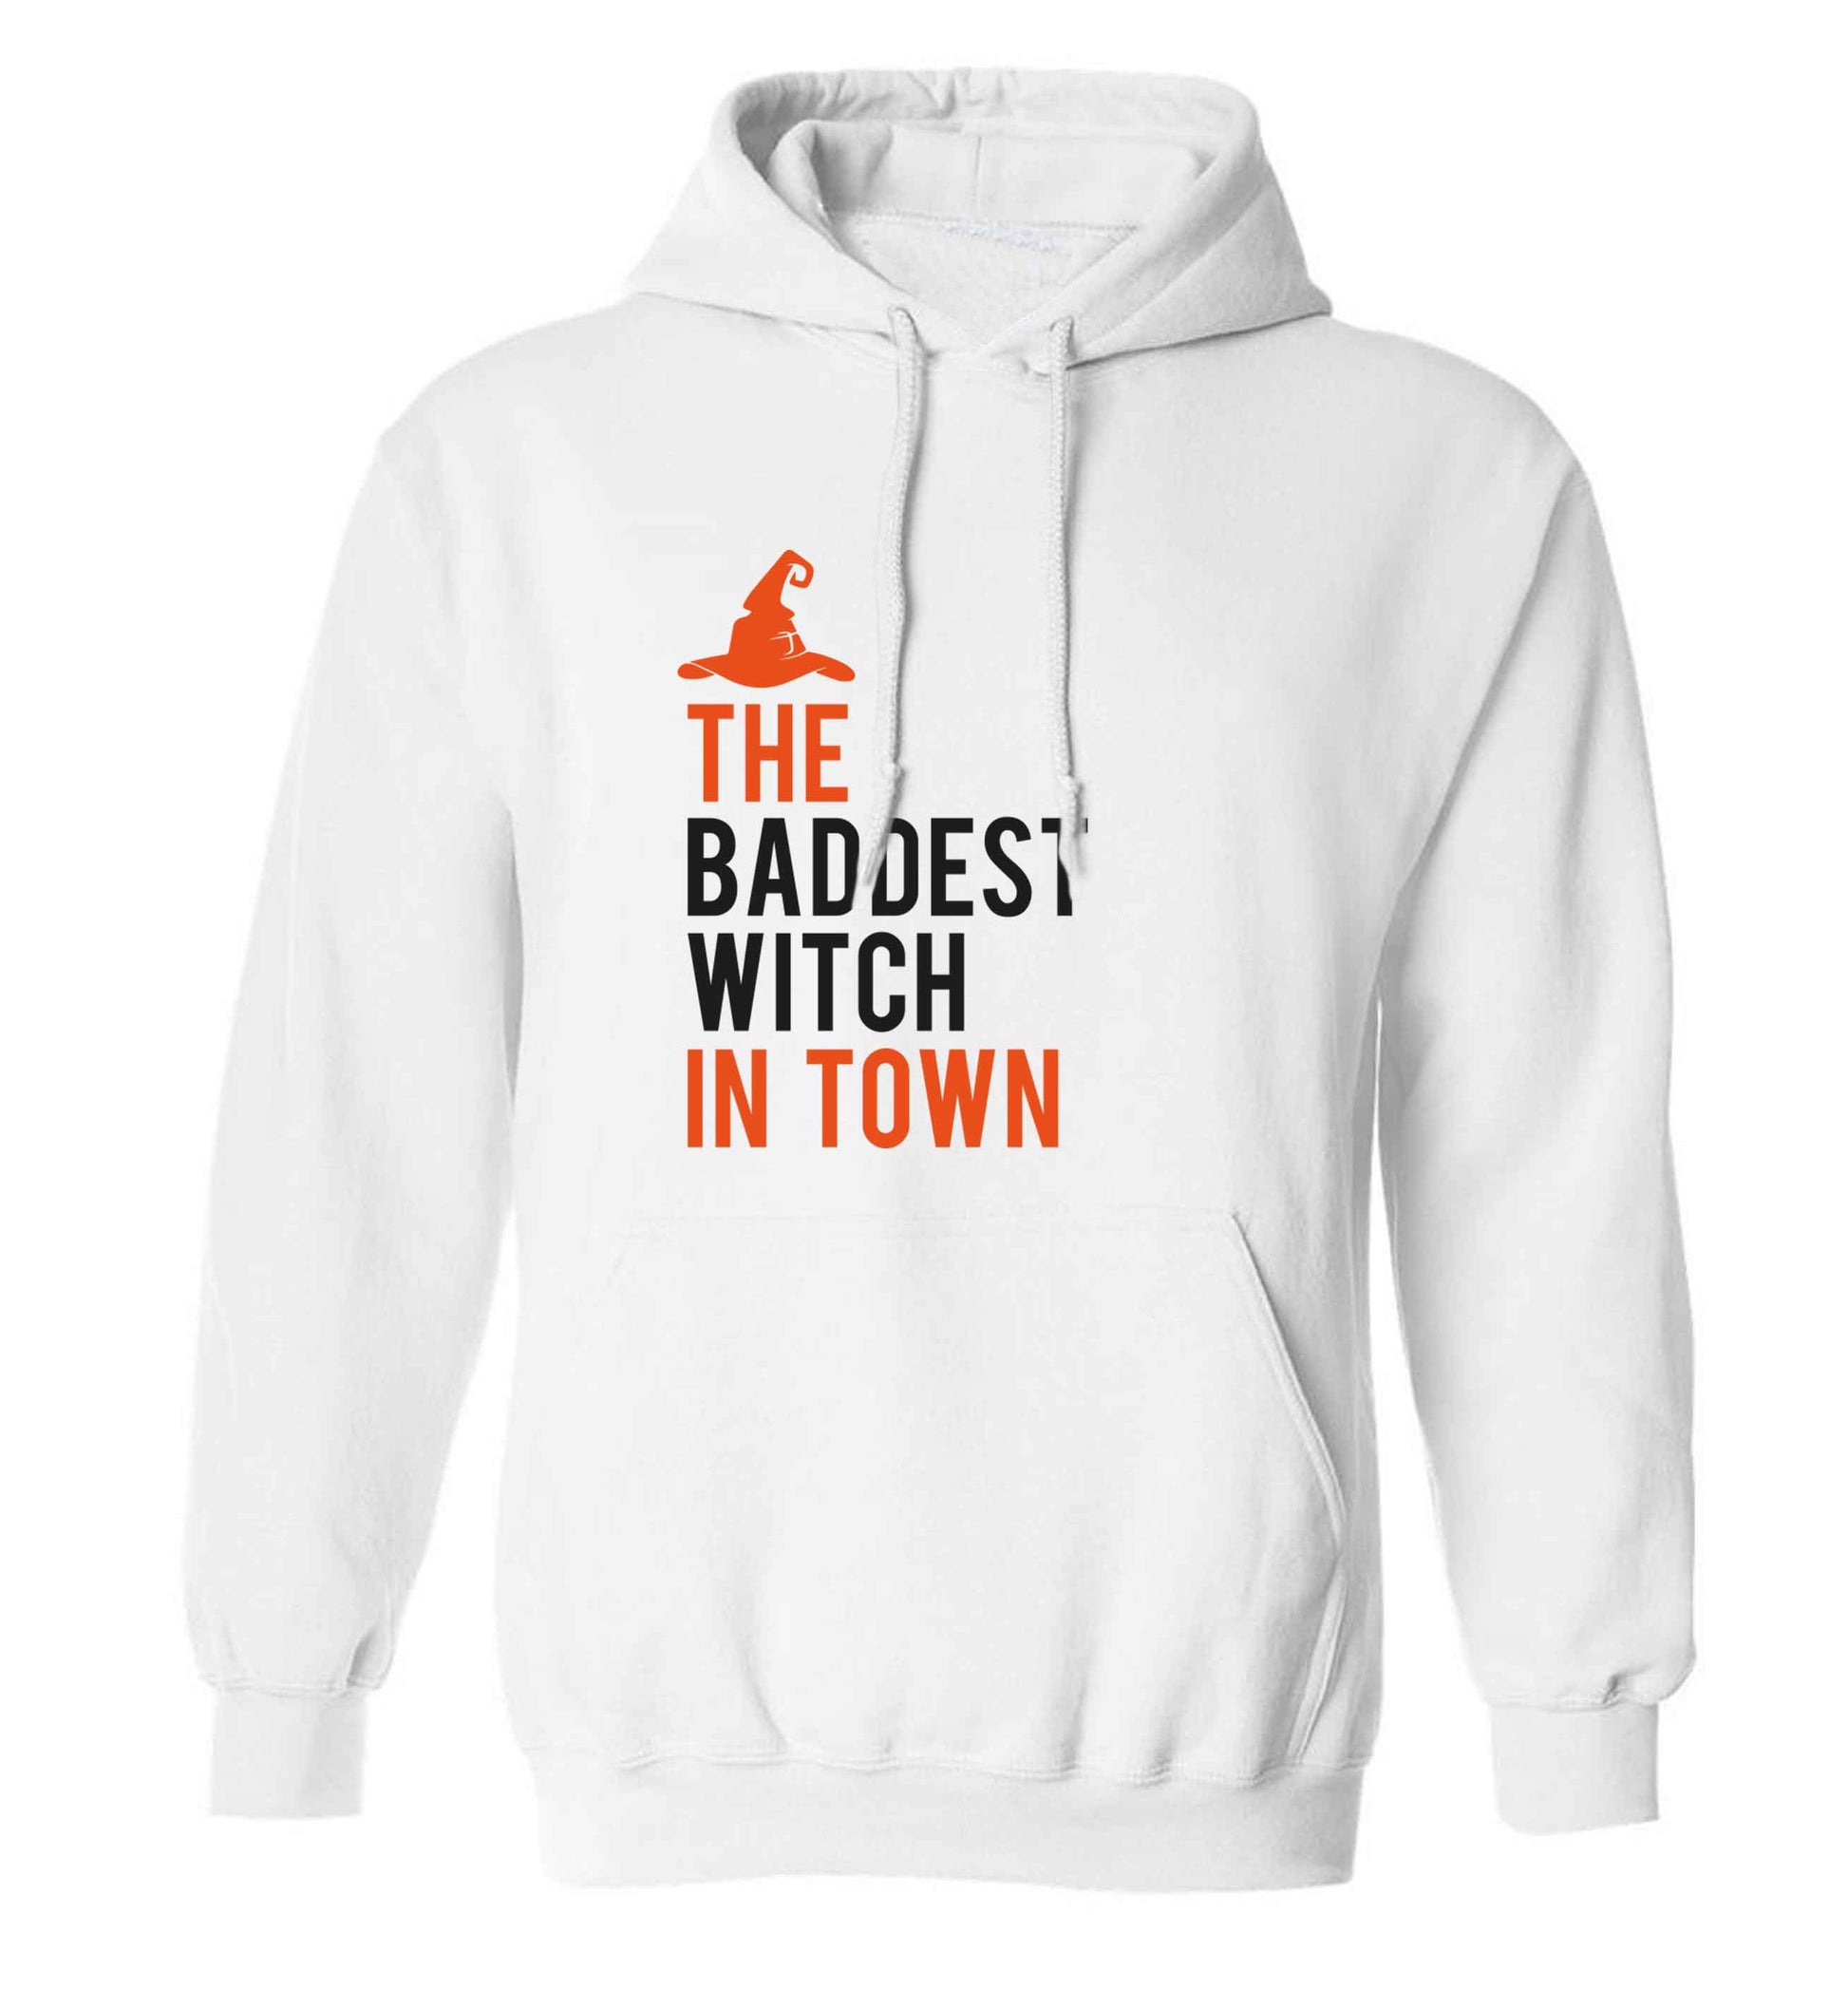 Badest witch in town adults unisex white hoodie 2XL